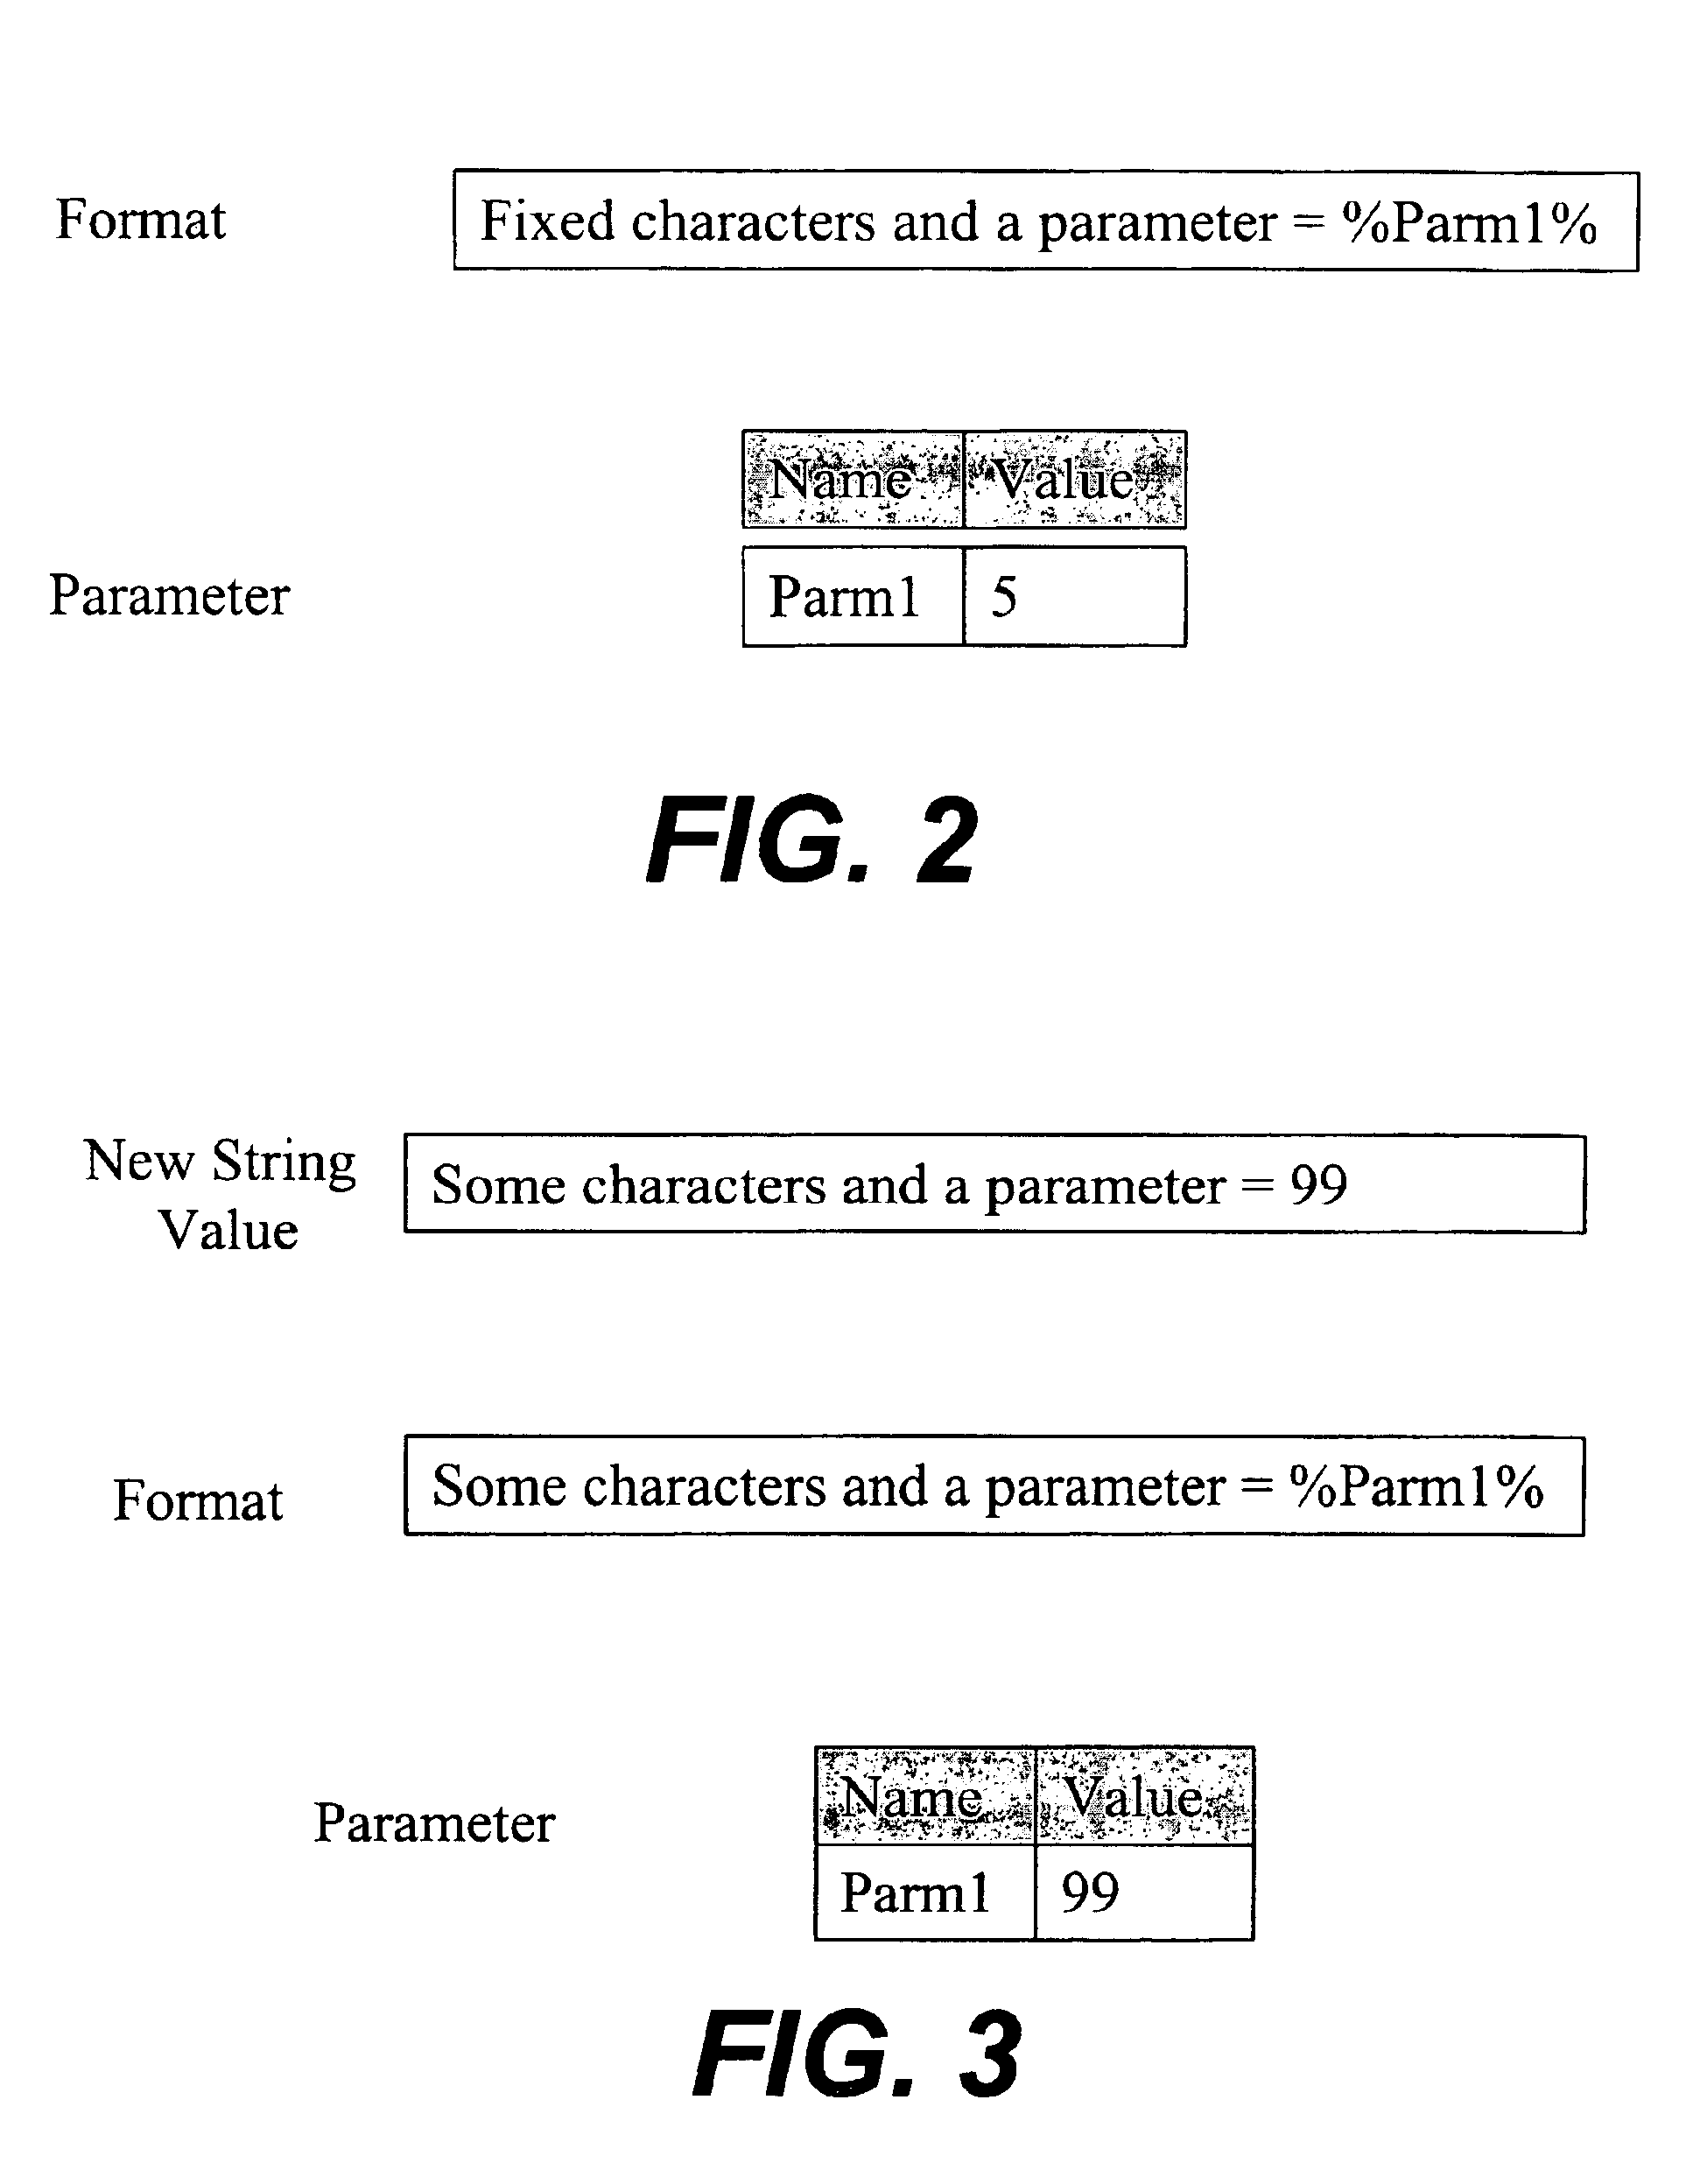 Active data type variable for use in software routines that facilitates customization of software routines and efficient triggering of variable processing